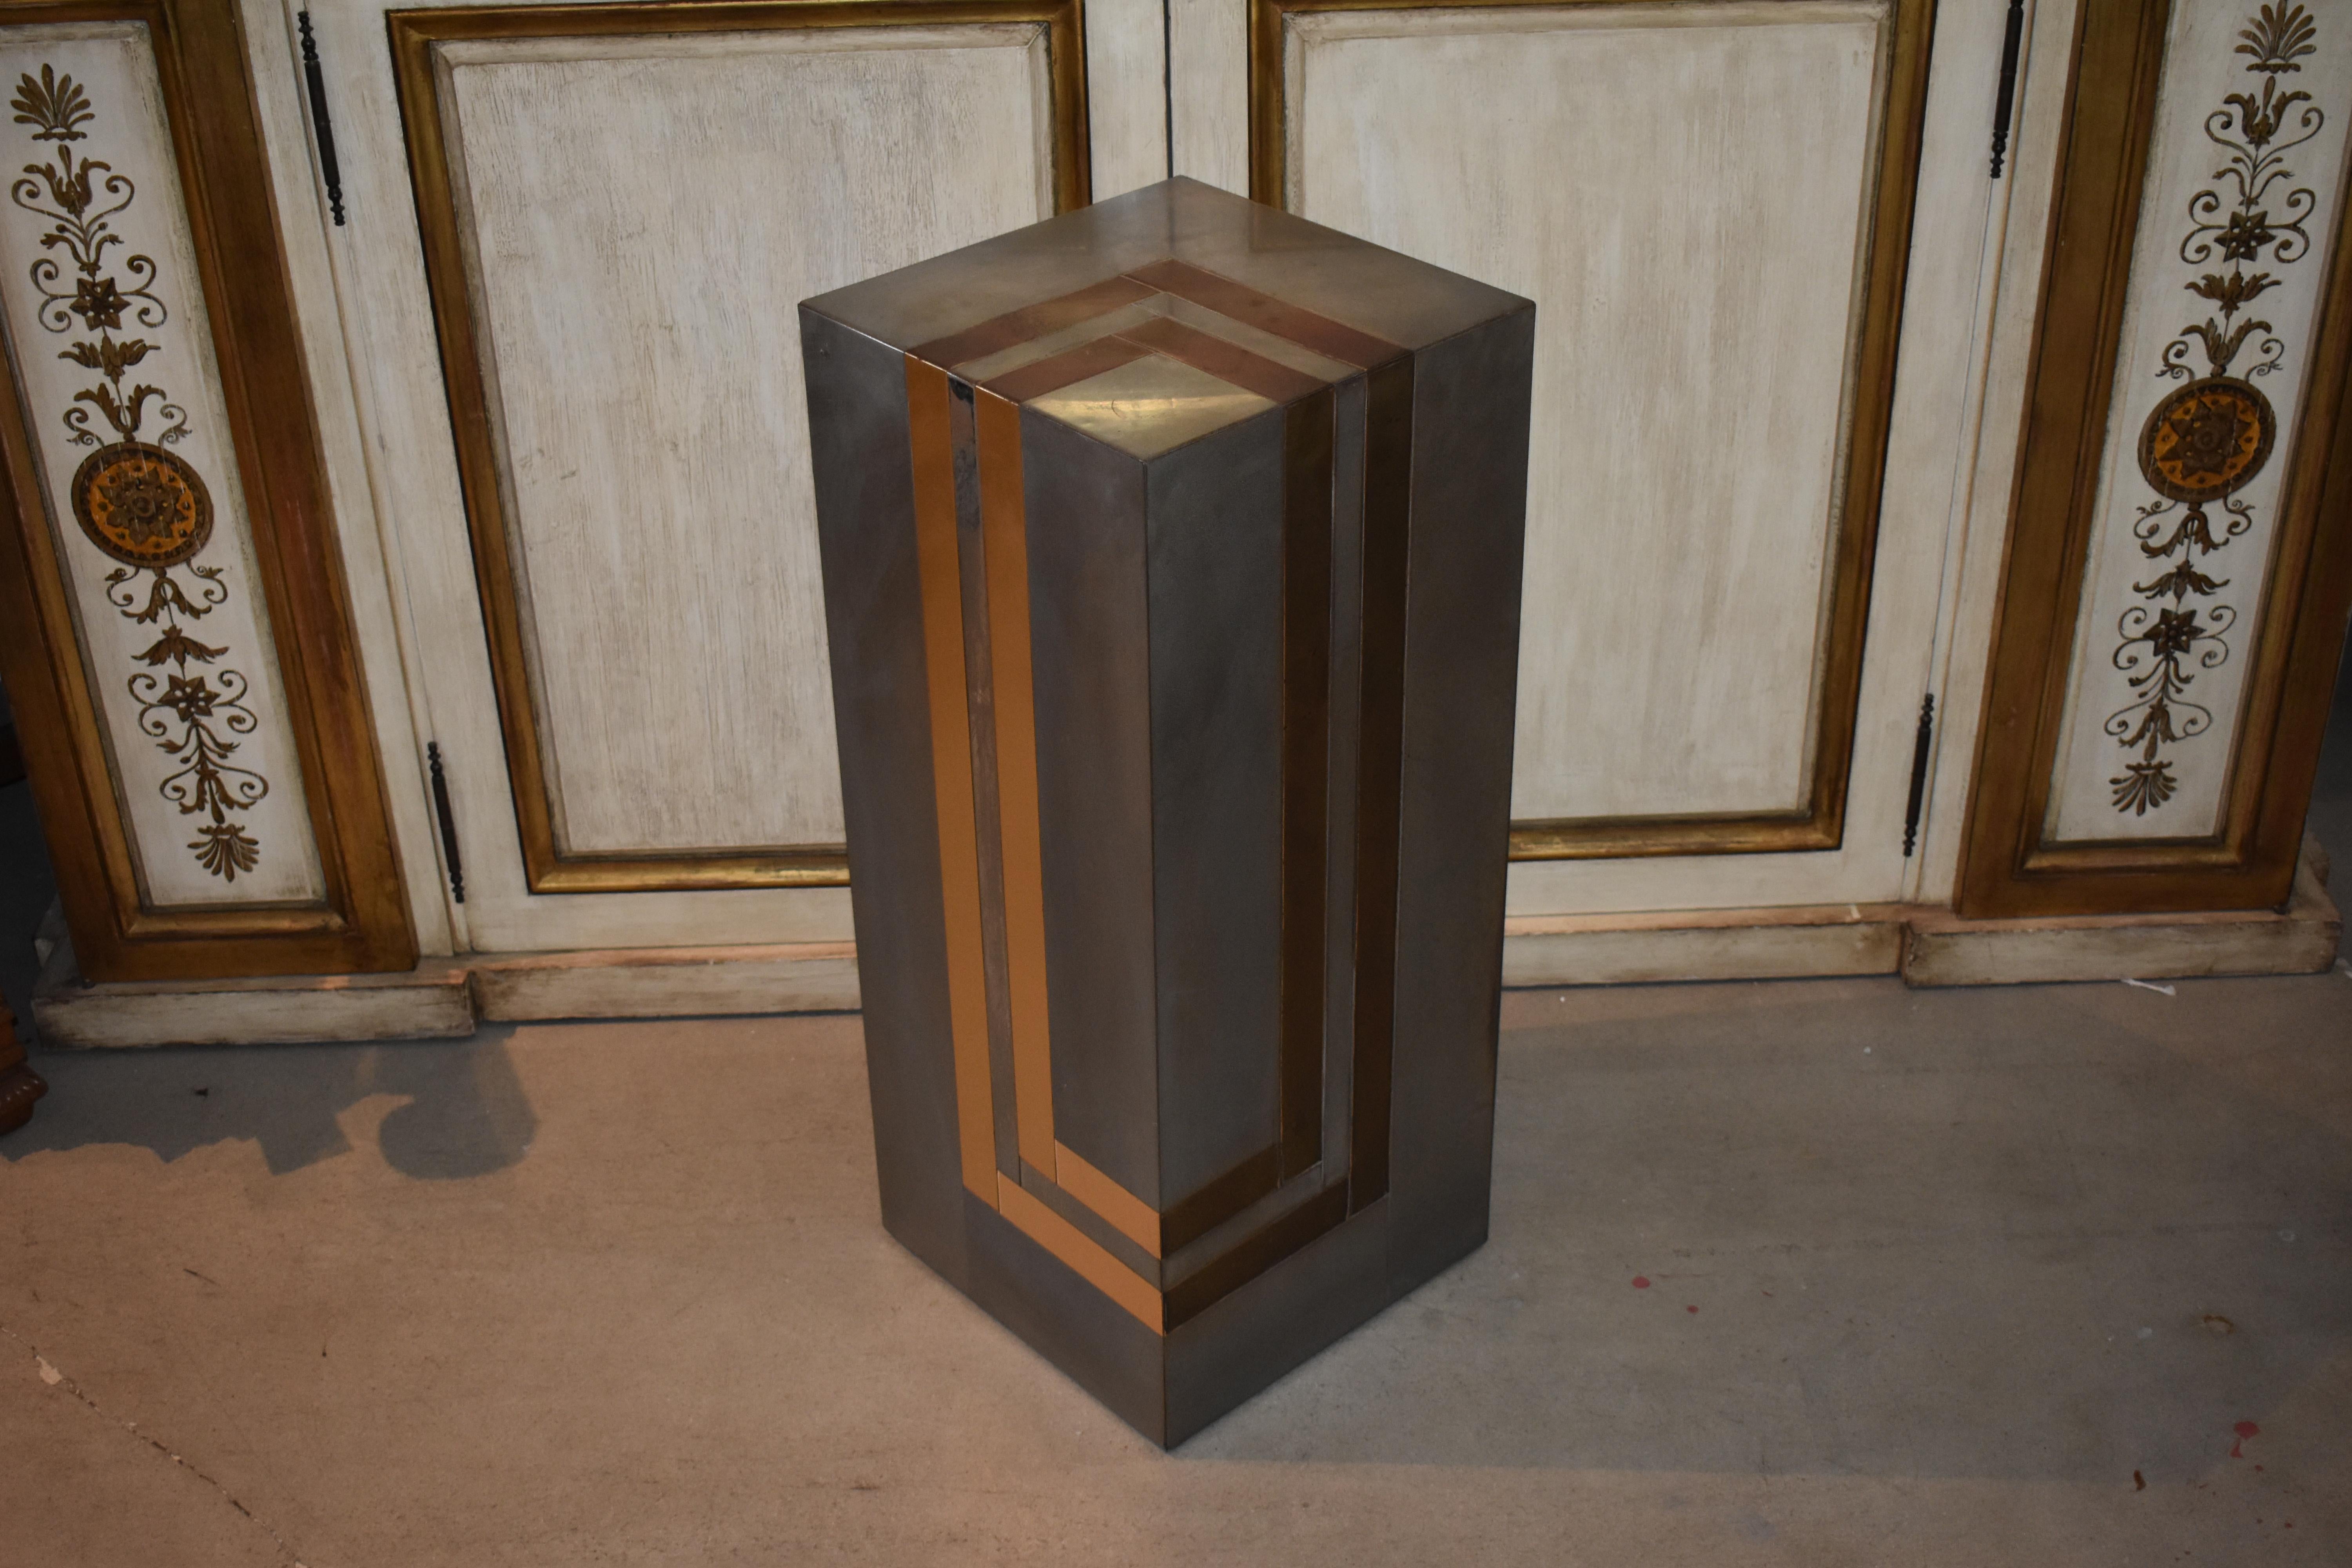 Rare Charles Hollis Jones steel and brass pedestal 1970s with original patina no restoration was made.

Provenance directly from CHJ private collection

About Charles Hollis Jones:

Charles Hollis Jones is an American artist and furniture